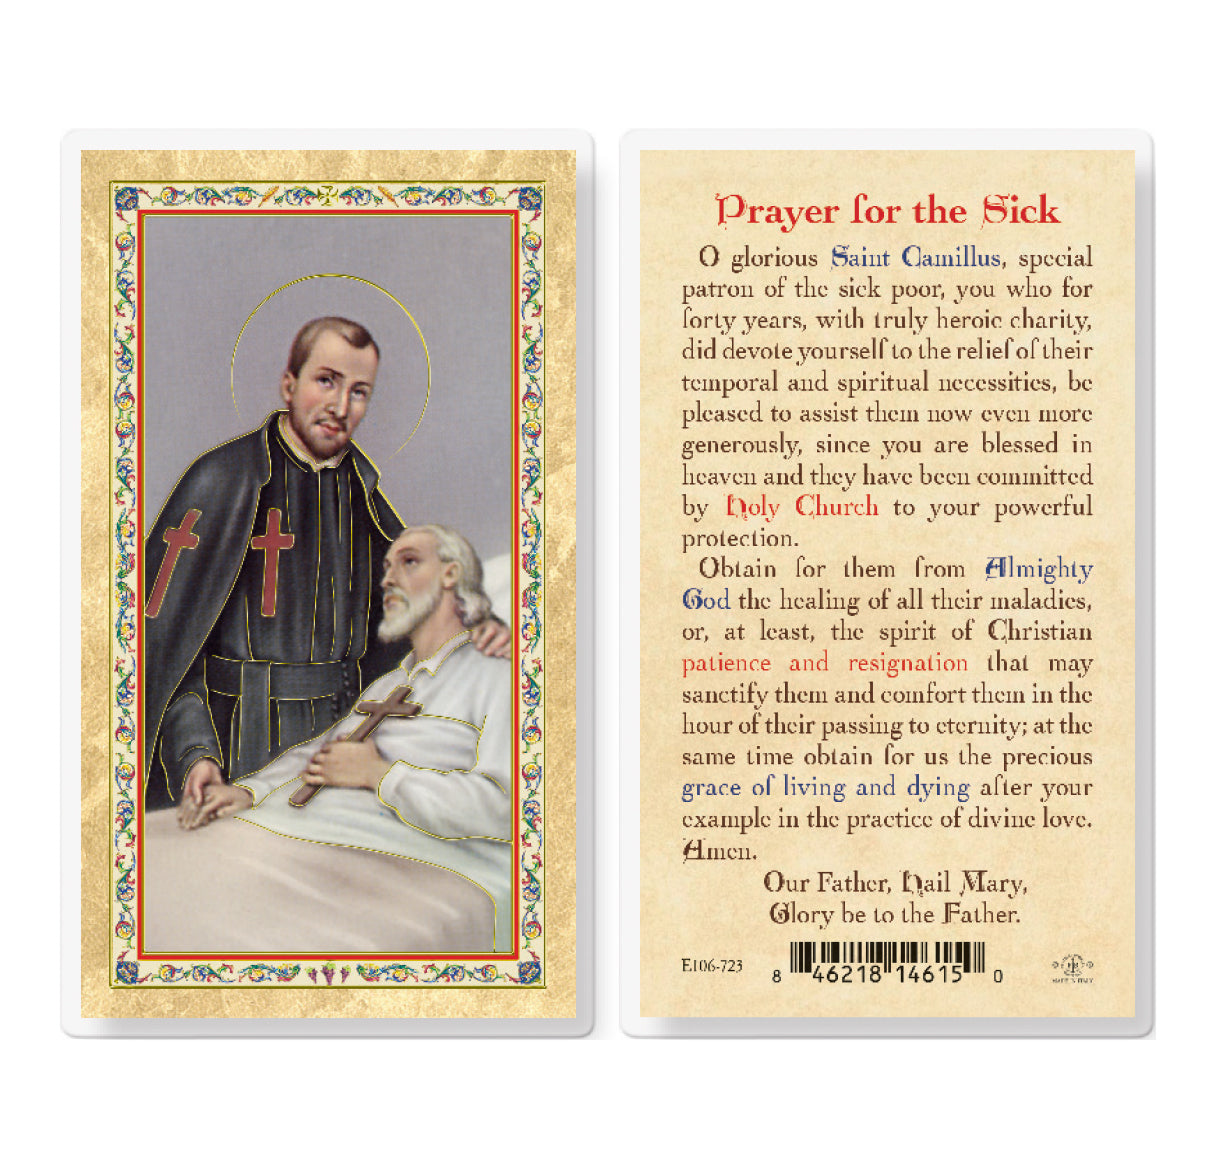 Prayer for the Sick - Christ Gold-Stamped Laminated Catholic Prayer Holy Card with Prayer on Back, Pack of 25